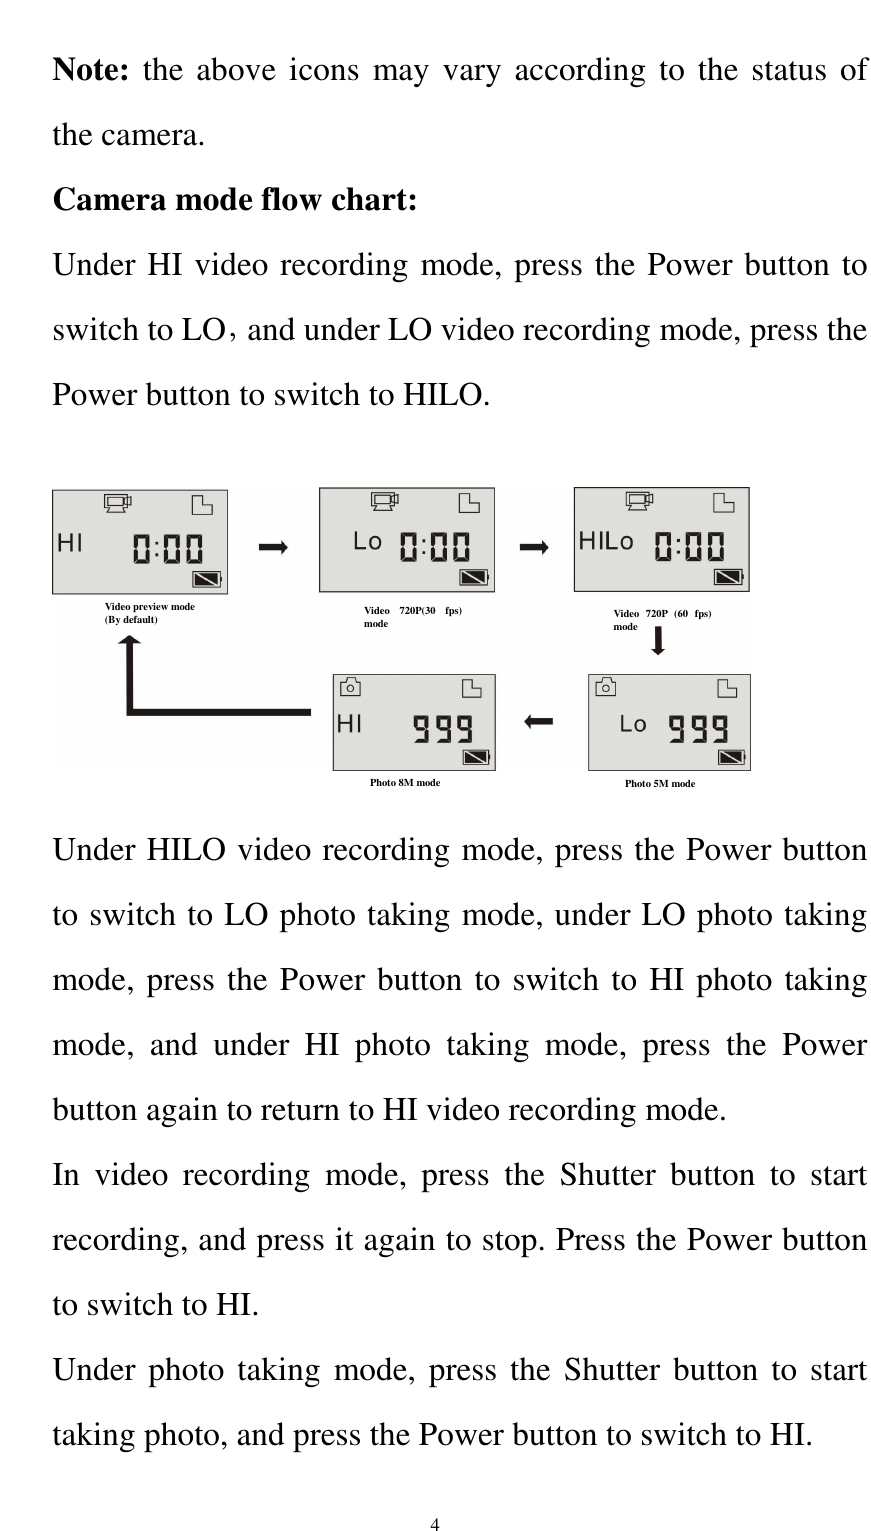    4Note: the above icons may vary according to the status of the camera.   Camera mode flow chart: Under HI video recording mode, press the Power button to switch to LO，and under LO video recording mode, press the Power button to switch to HILO.       Under HILO video recording mode, press the Power button to switch to LO photo taking mode, under LO photo taking mode, press the Power button to switch to HI photo taking mode,  and  under  HI  photo  taking  mode,  press  the  Power button again to return to HI video recording mode.   In  video  recording  mode,  press  the  Shutter  button  to  start recording, and press it again to stop. Press the Power button to switch to HI.   Under photo taking mode, press the Shutter button to start taking photo, and press the Power button to switch to HI. Video preview mode (By default)  Video  720P(30  fps) mode Video  720P  (60  fps) mode Photo 5M mode Photo 8M mode 